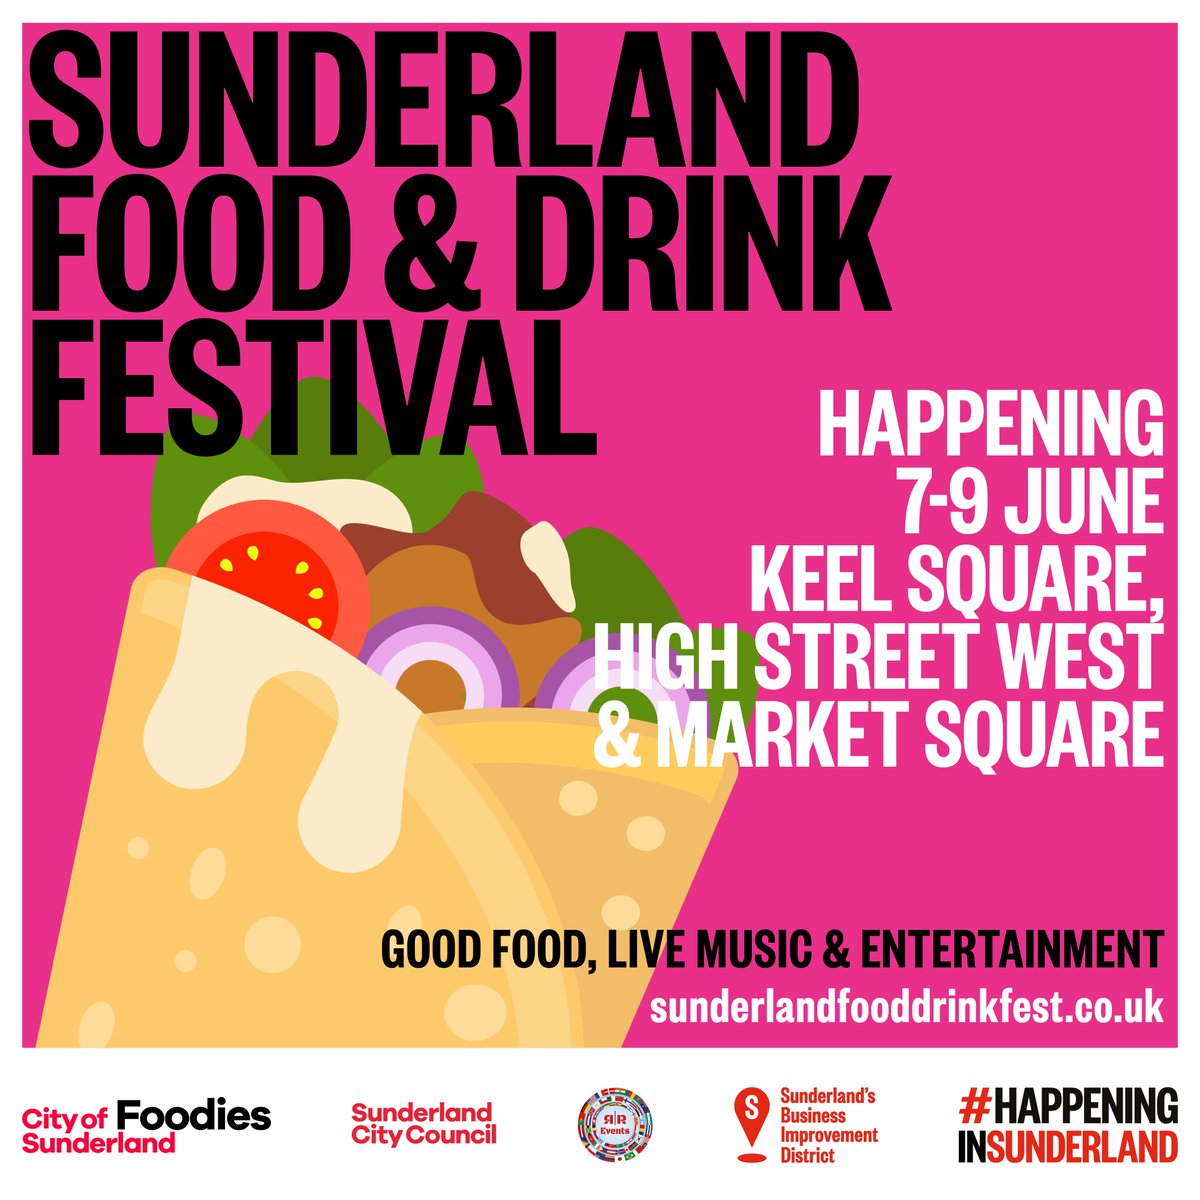 FOODIES! The countdown is ON 🥙 🥗 🍔 Sunderland Food and Drink Festival is #HappeningInSunderland City Centre on 7, 8 and 9 June! Kickstart your summer with some food and some fun in Sunderland... Find out more 👉 orlo.uk/u63nx